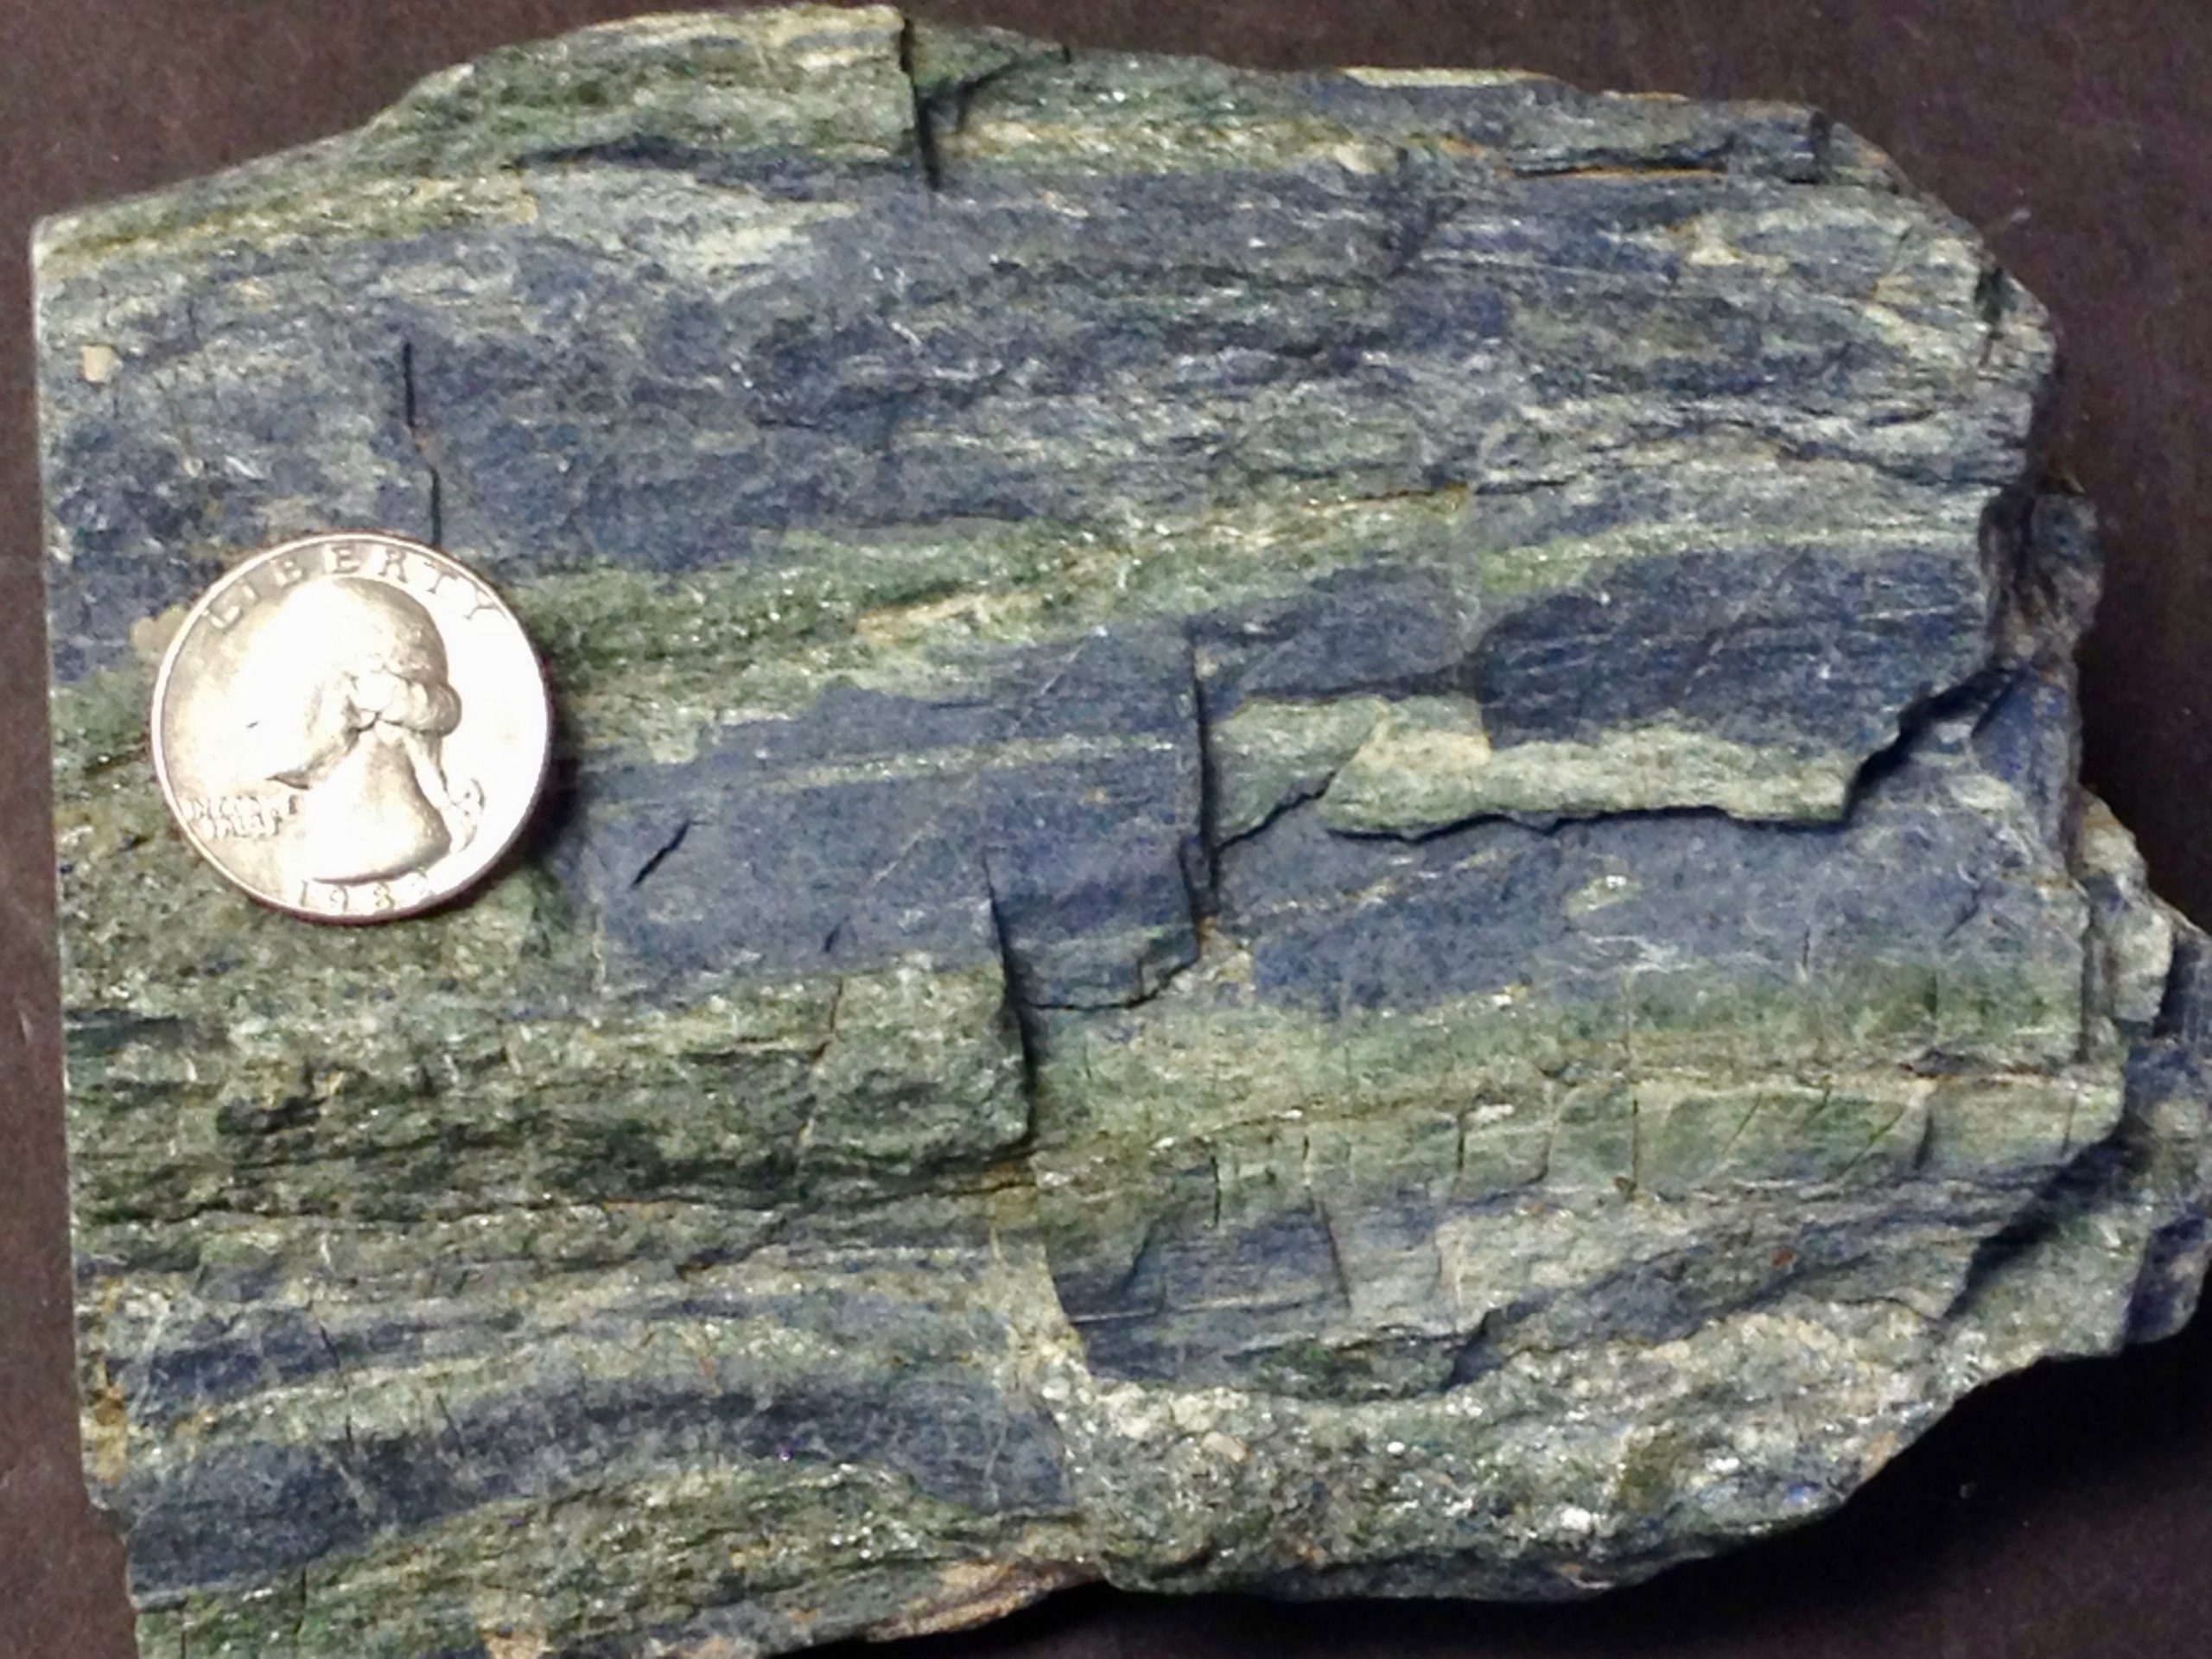 Sample of dark blue rock with dark green bands throughout; silvery mica grains can also be seen sparsely throughout the sample; a US quarter rests on the sample for scale.